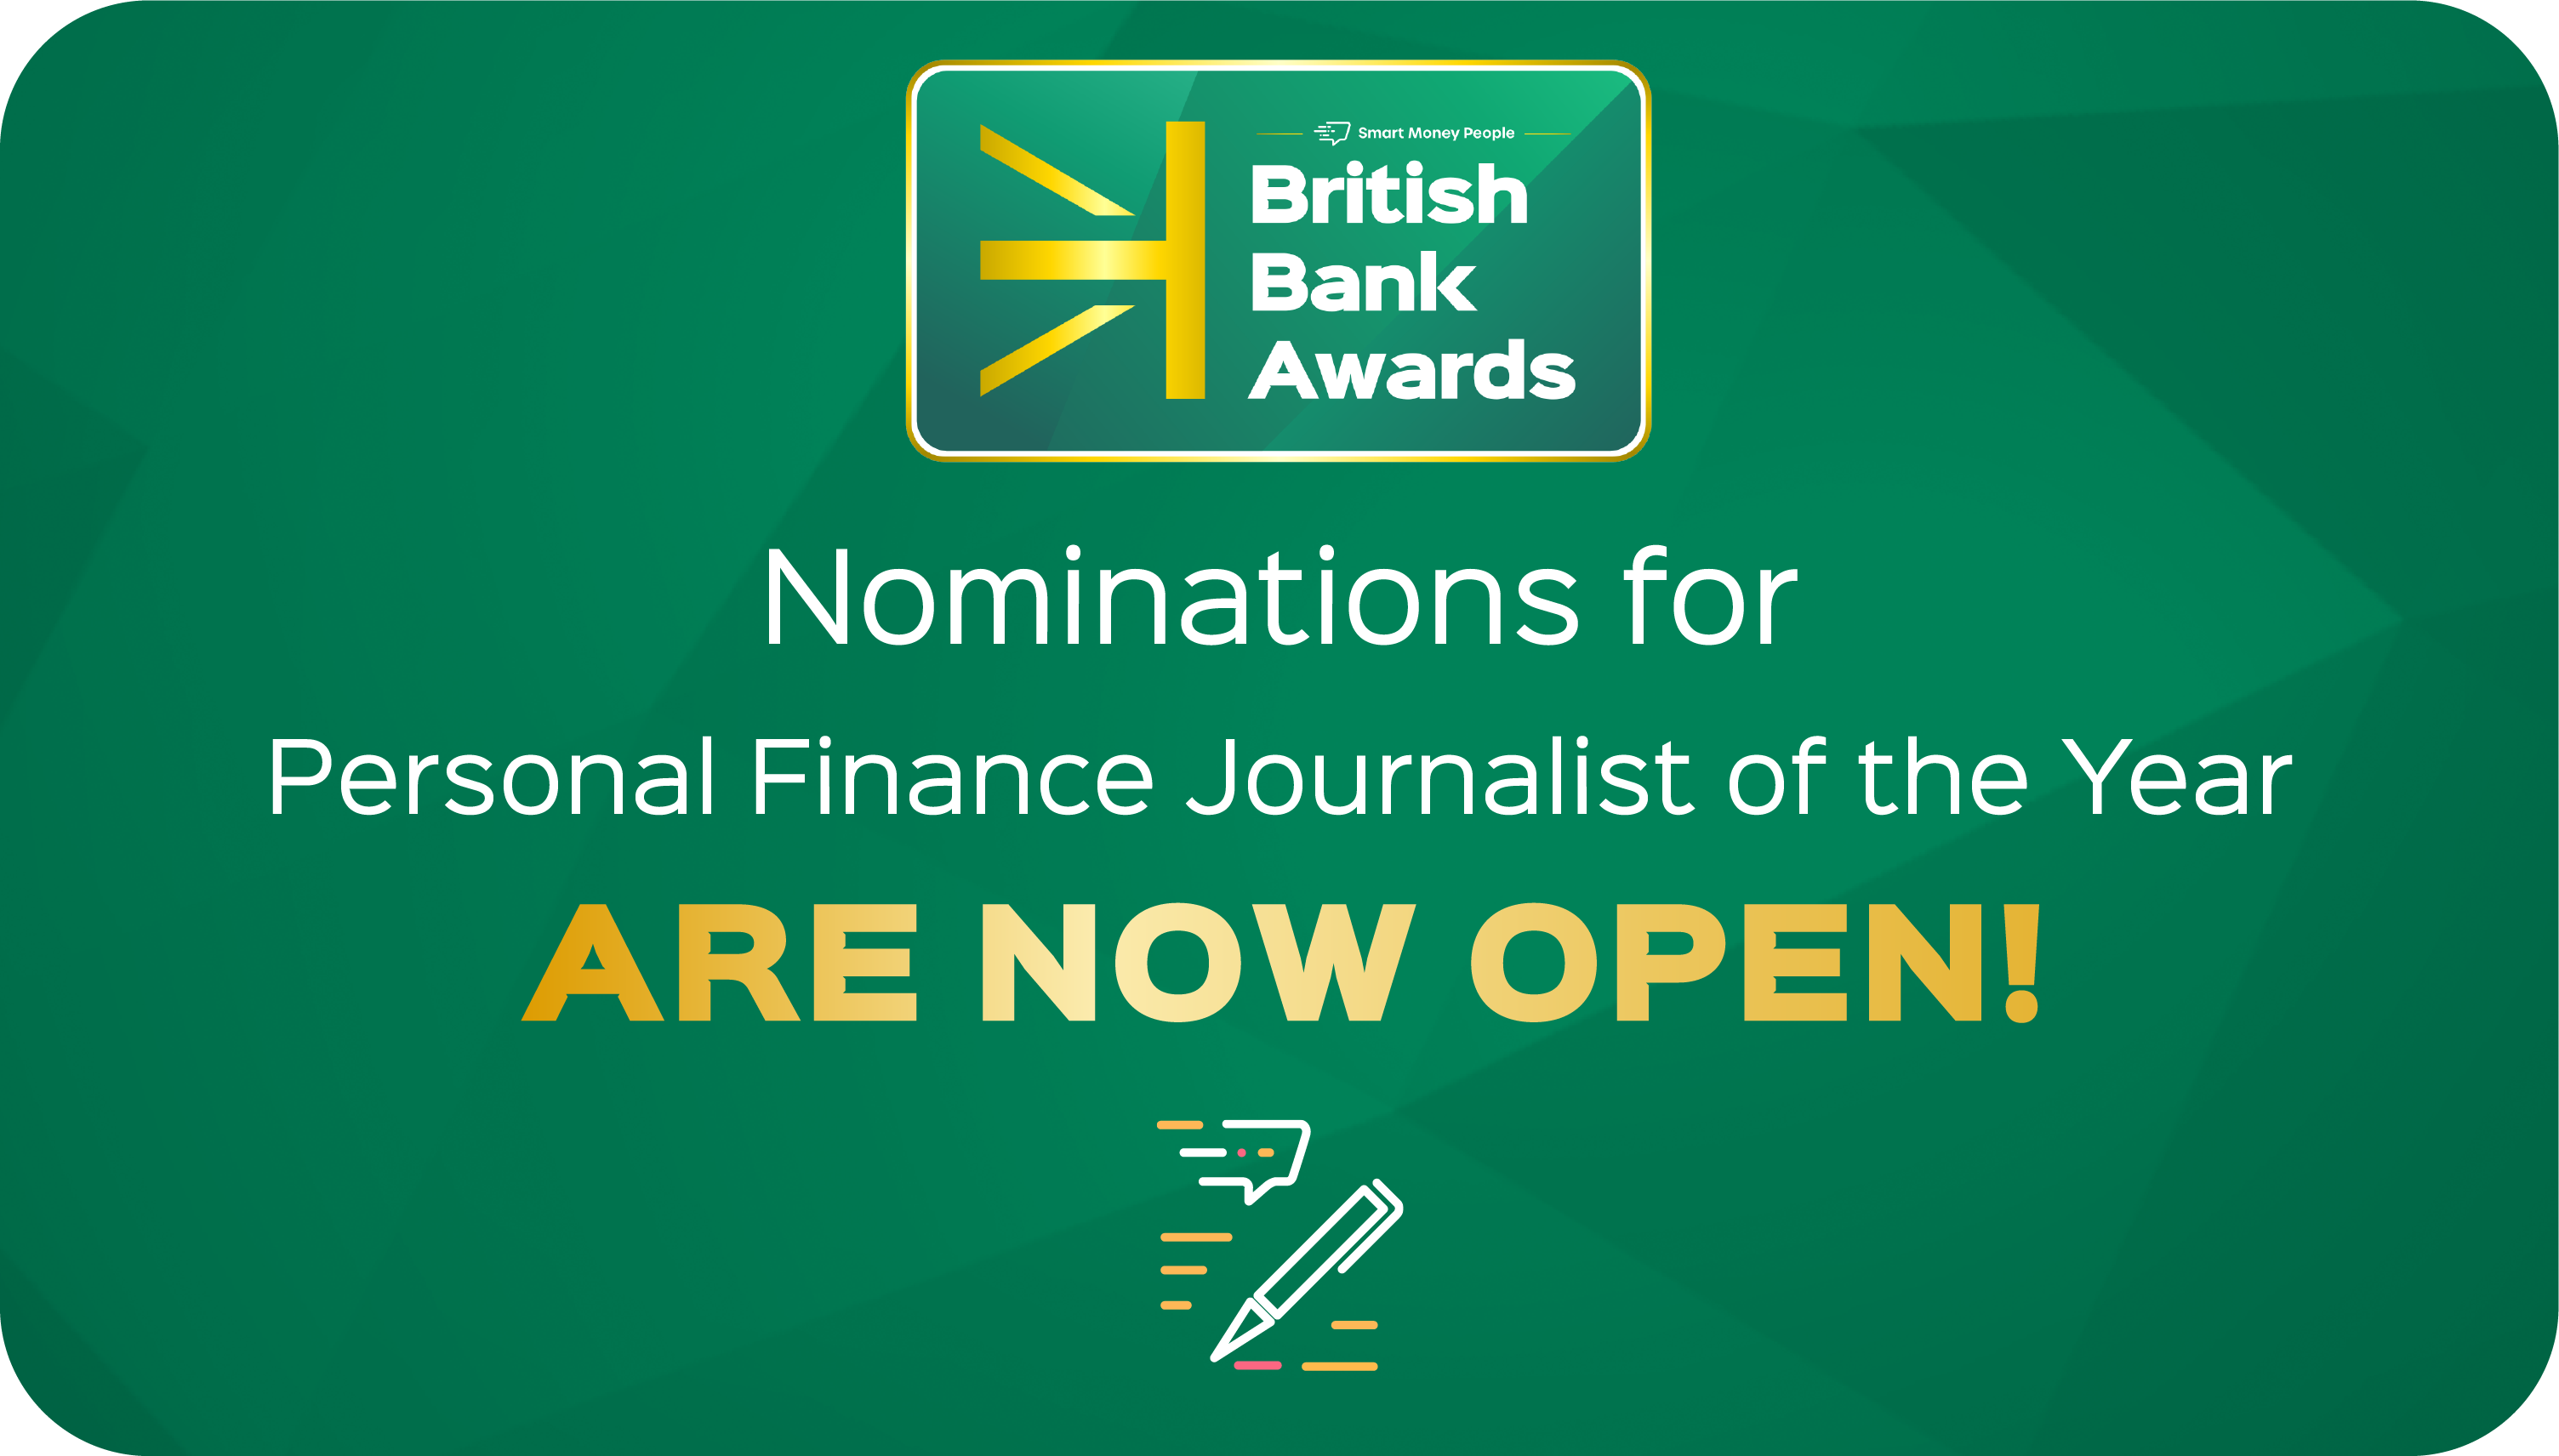 Vote now for your Personal Finance Journalist of the Year!